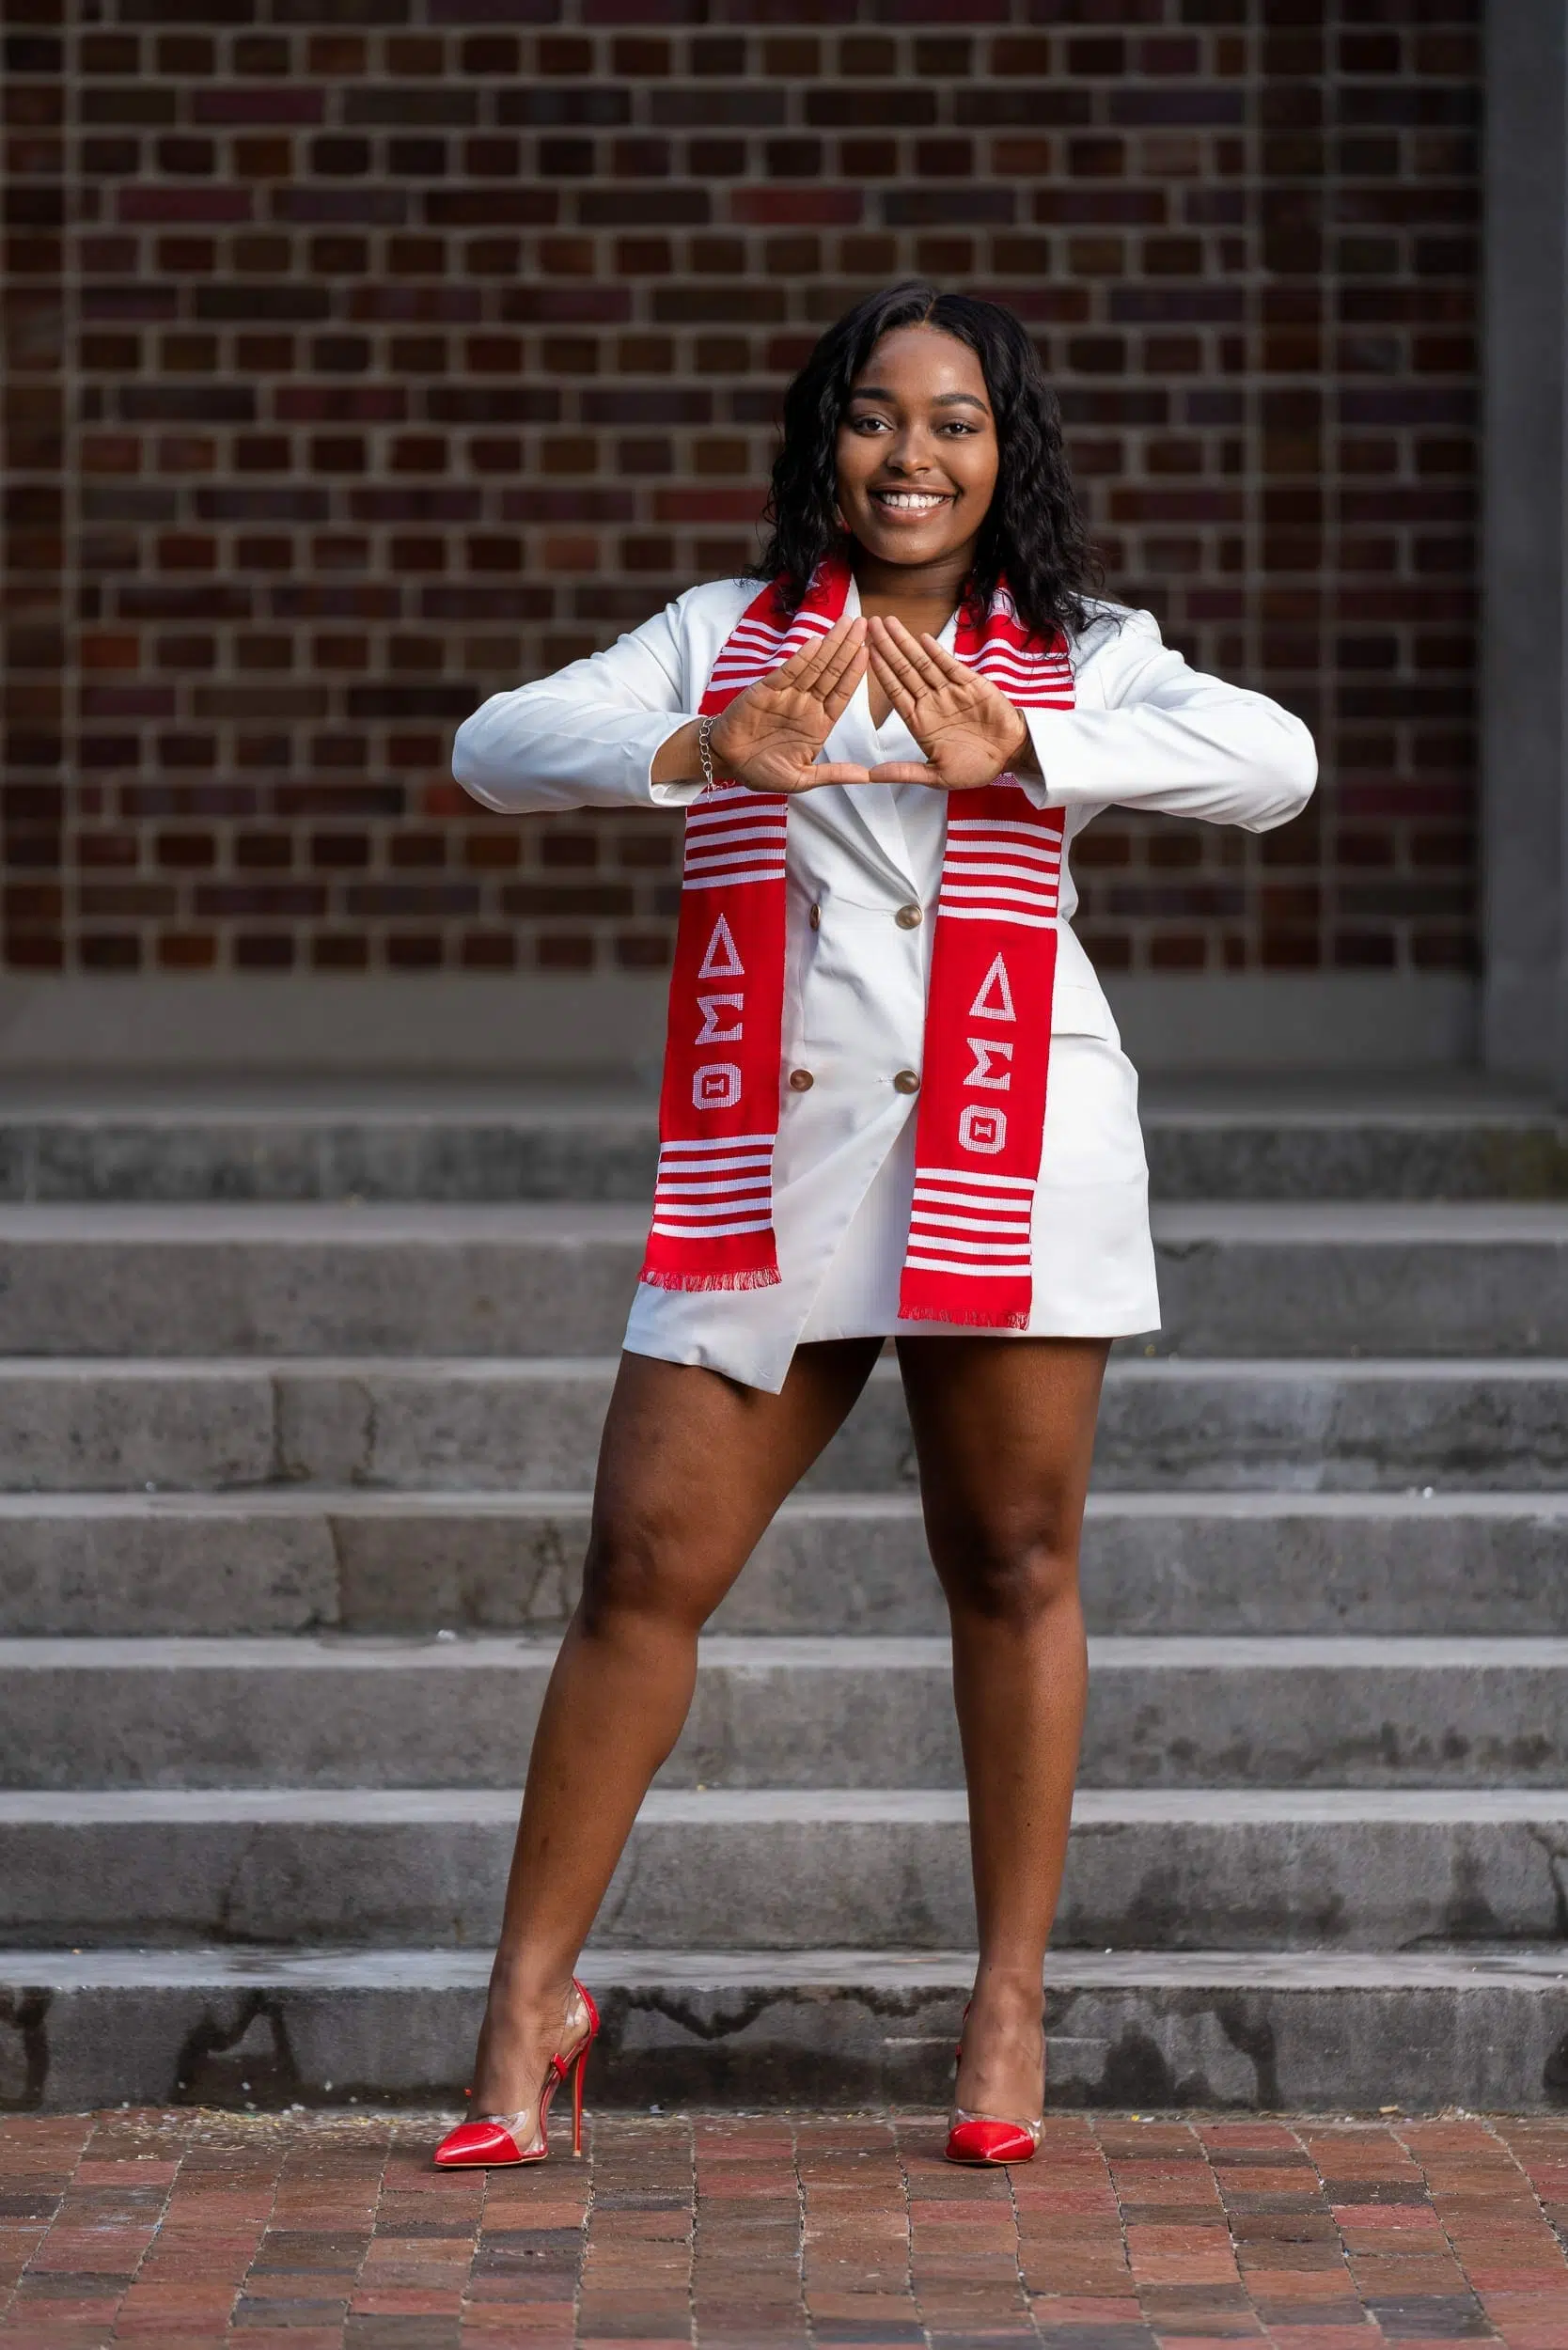 Black woman part of the delta sorority posing for her graduation photos at UNC College Campus.